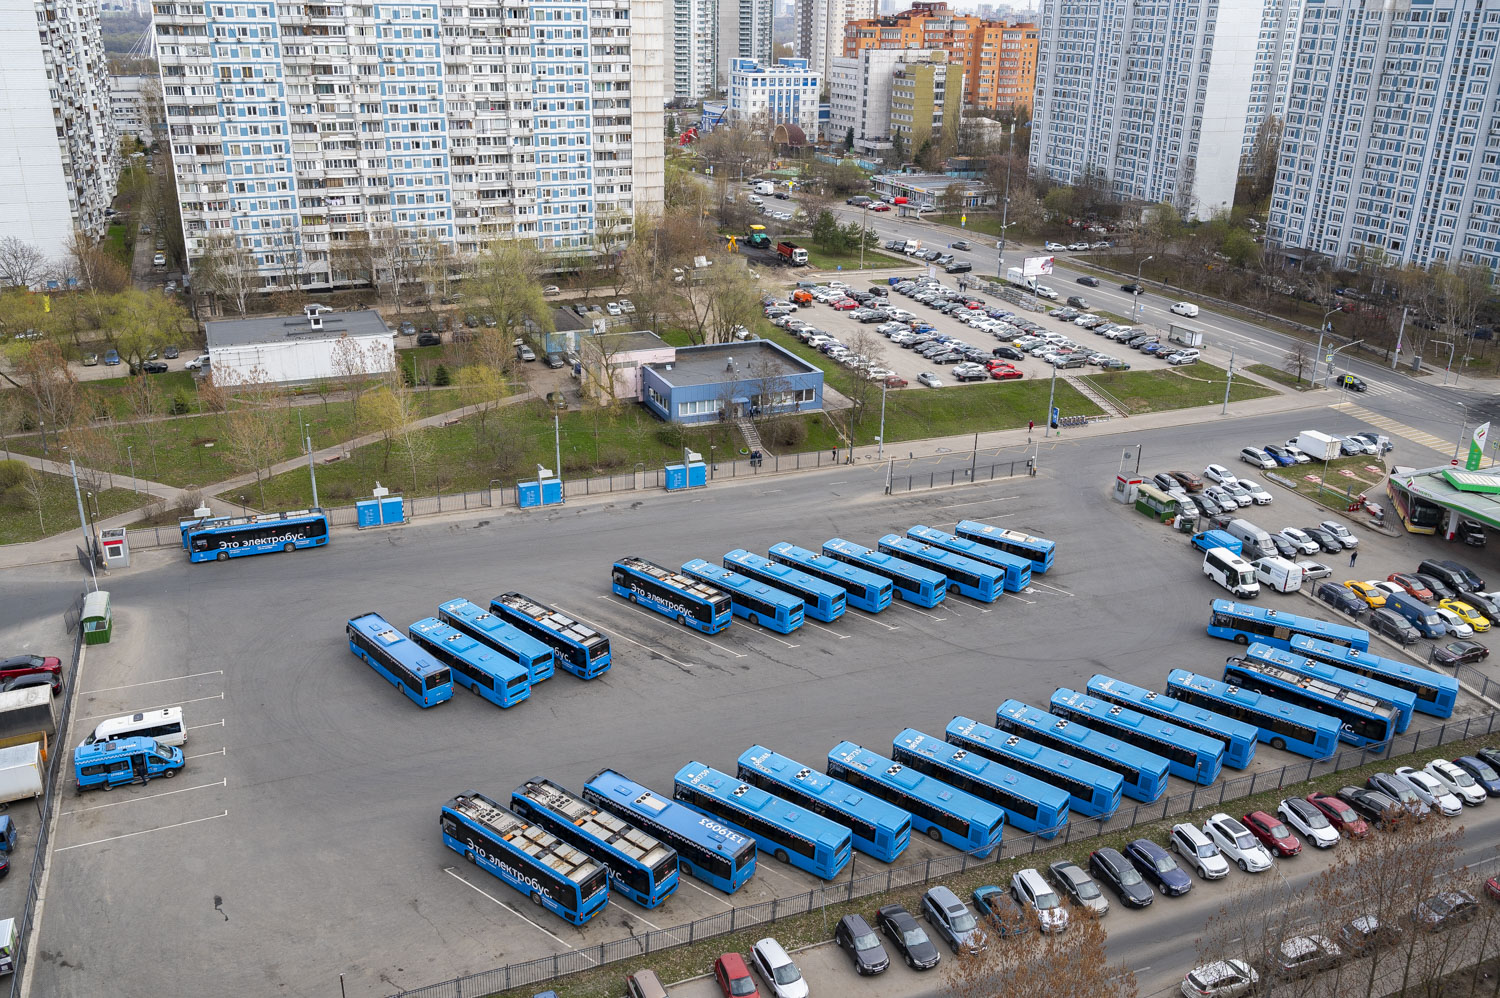 Moscow, Nizhegorodets-222708 (Ford Transit FBD) # 1777038; Moscow, KAMAZ-6282 # 410409; Moscow, KAMAZ-6282 # 410404; Moscow, NefAZ-5299-40-52 # 1321062; Moscow, KAMAZ-6282 # 410427; Moscow — Bus stations